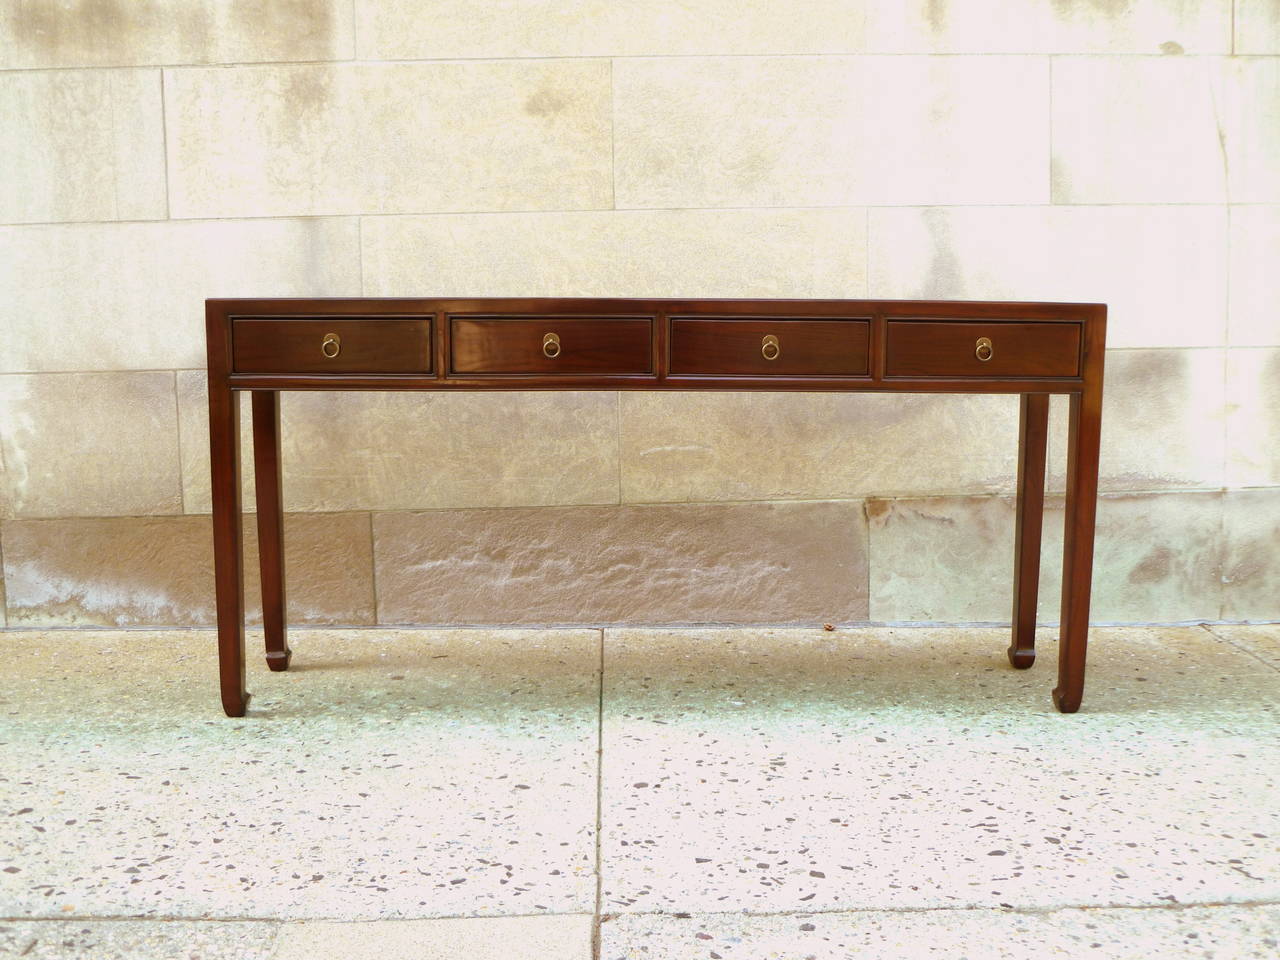 A refined and elegant ju mu woodconsole table with four drawers, brass ring pulls, beautiful color, form and lines.